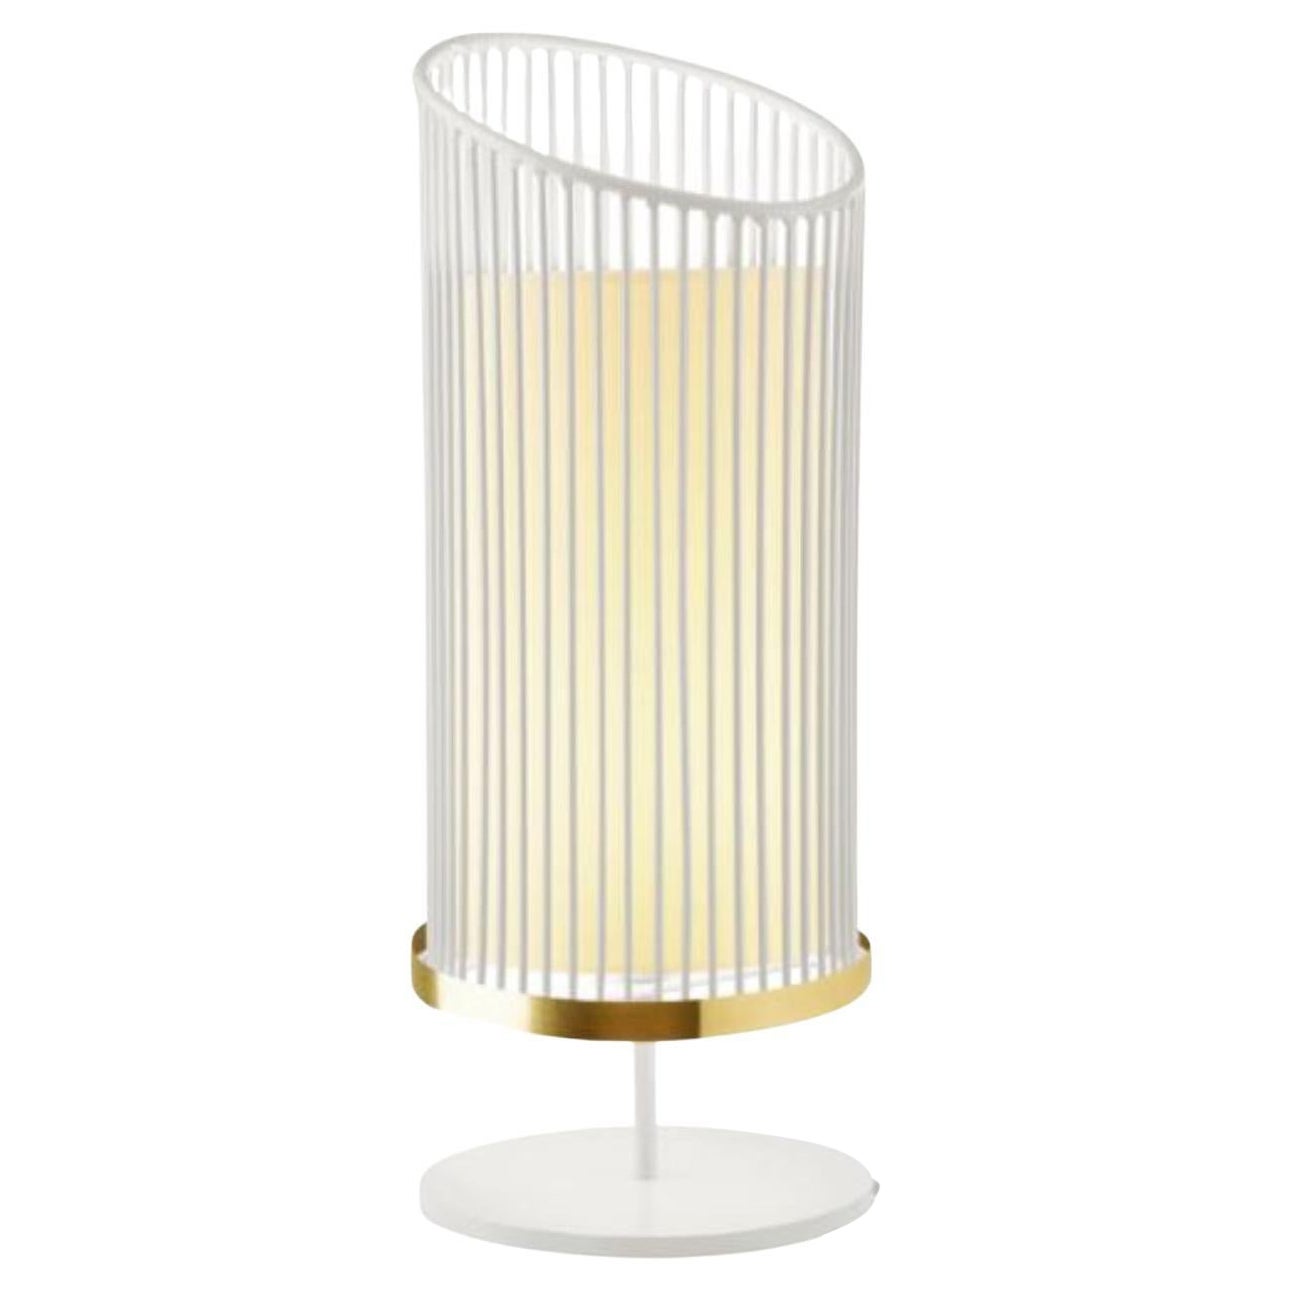 Ivory New Spider Table Lamp with Brass Ring by Dooq